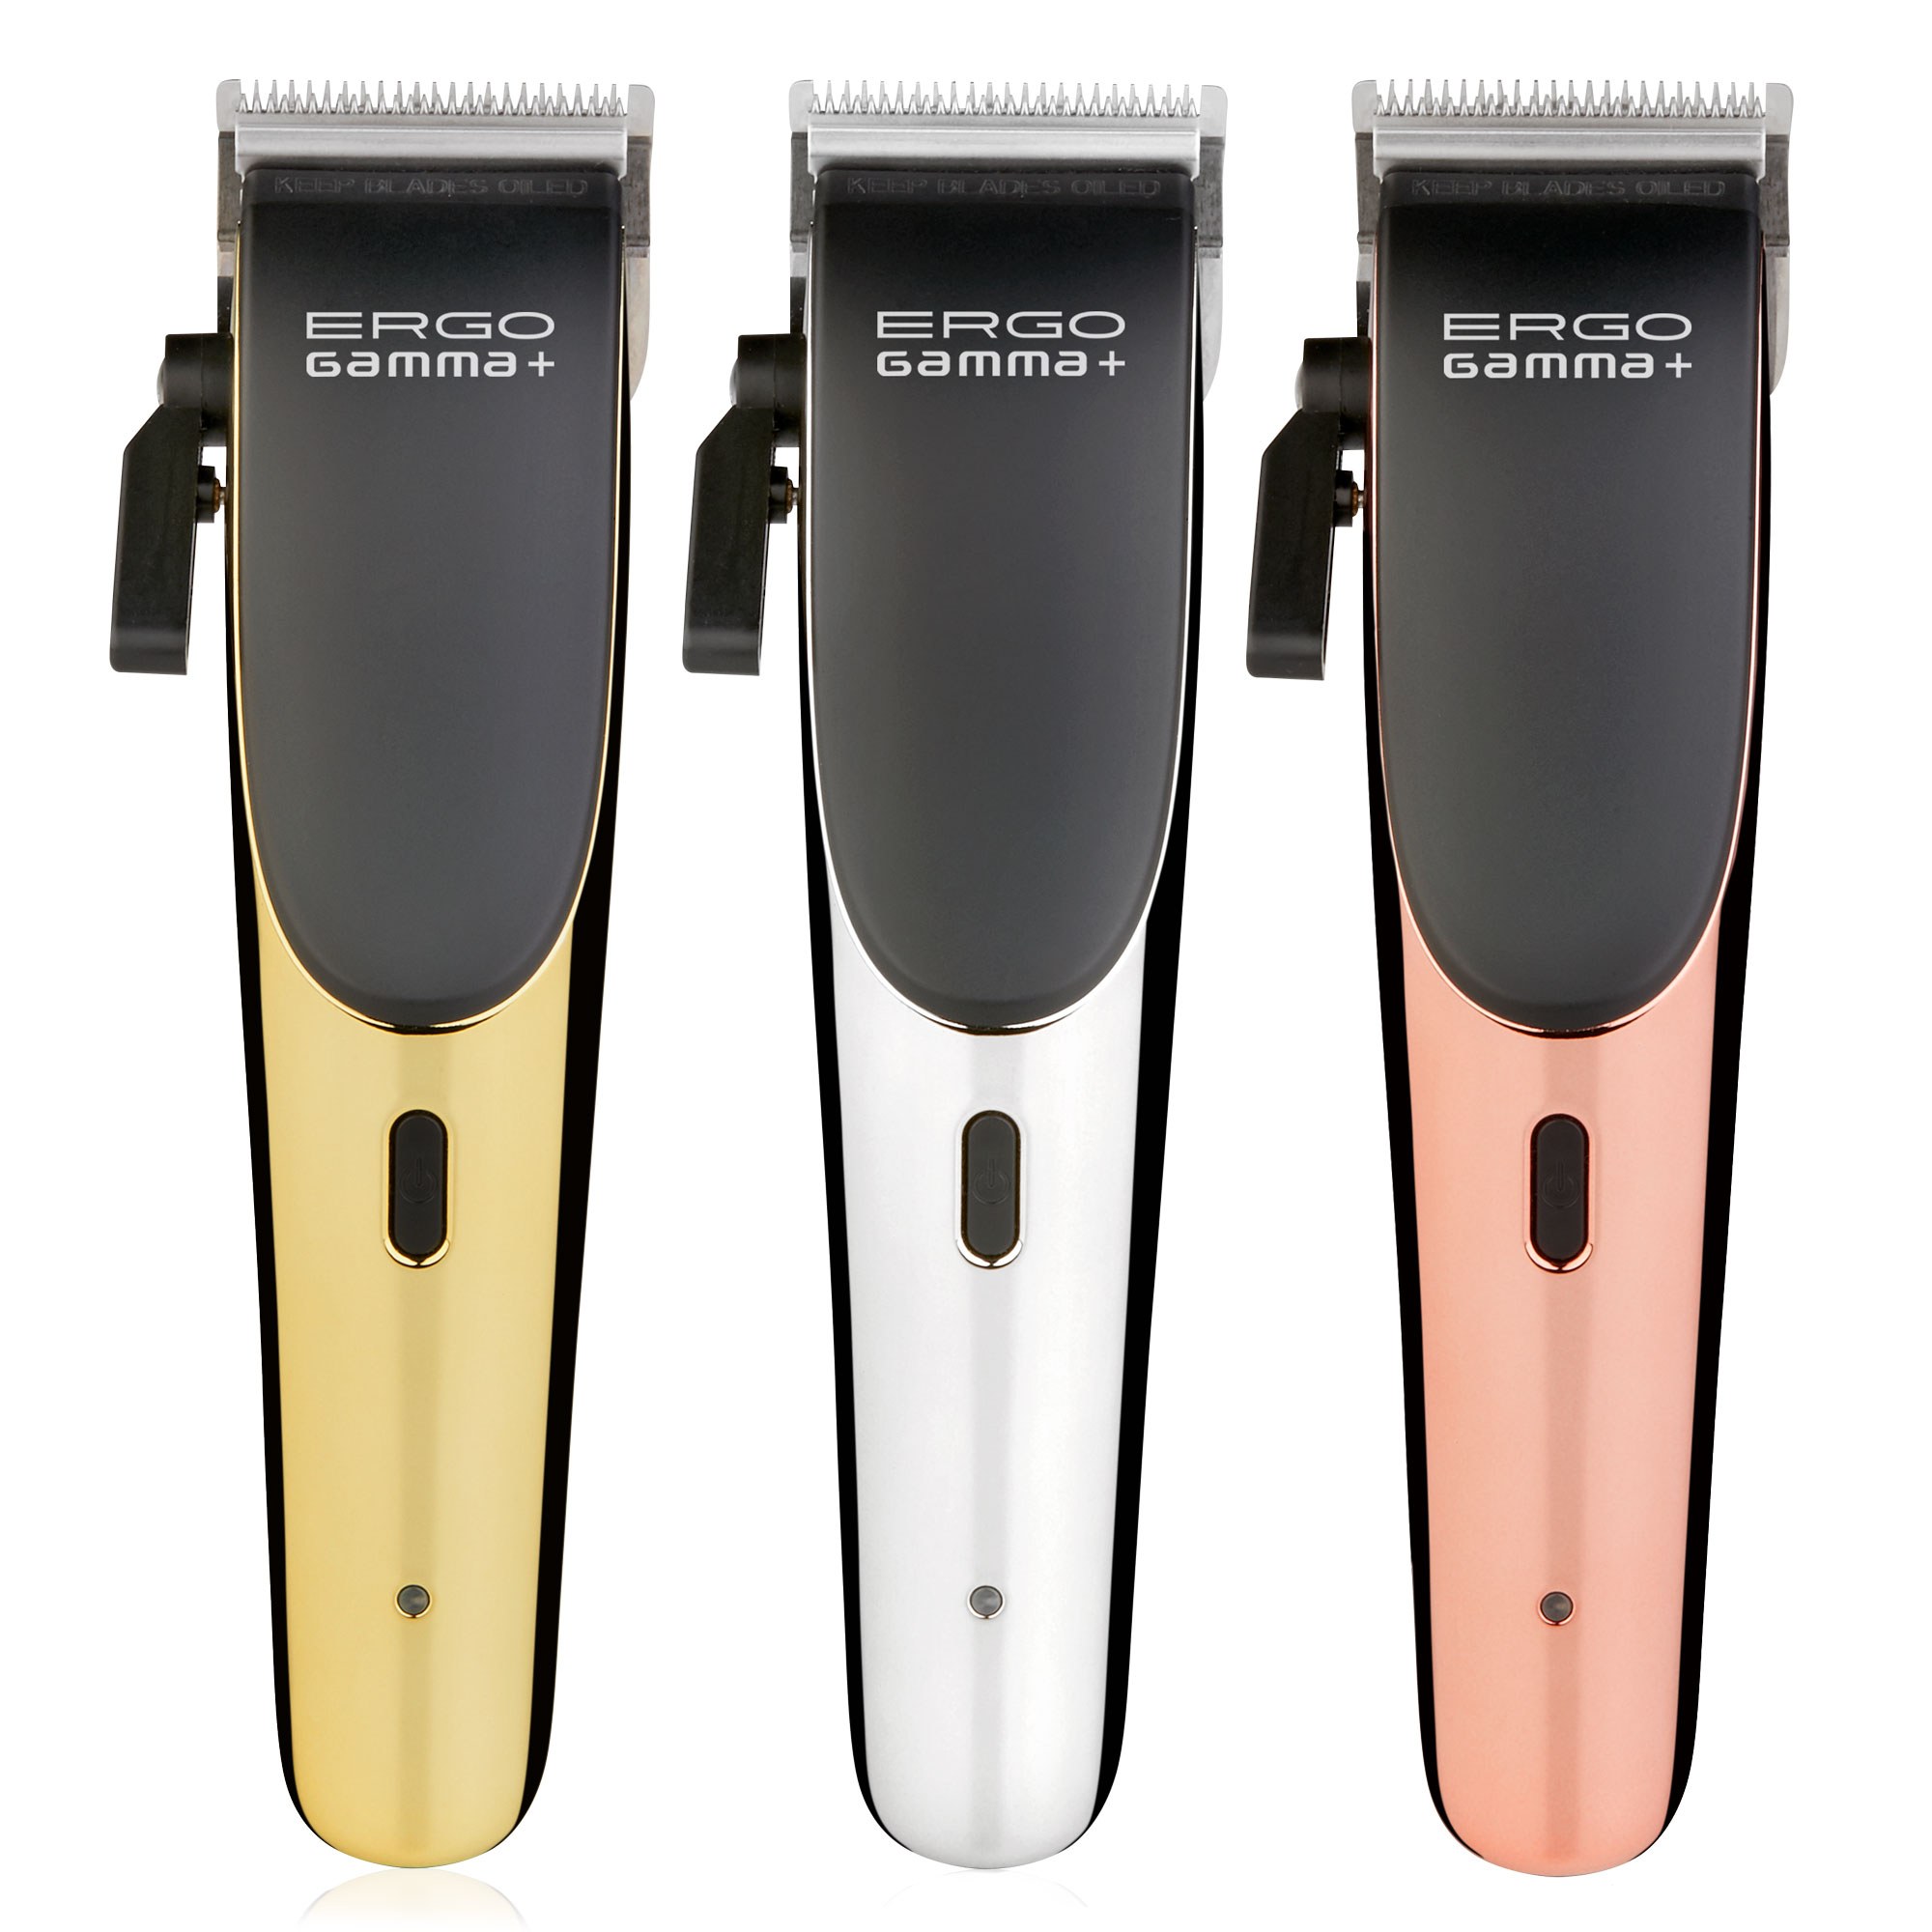 Stylecraft Ergo Magnetic Clipper with Gold, Chrome, and Rose Gold Metallic Body Kits